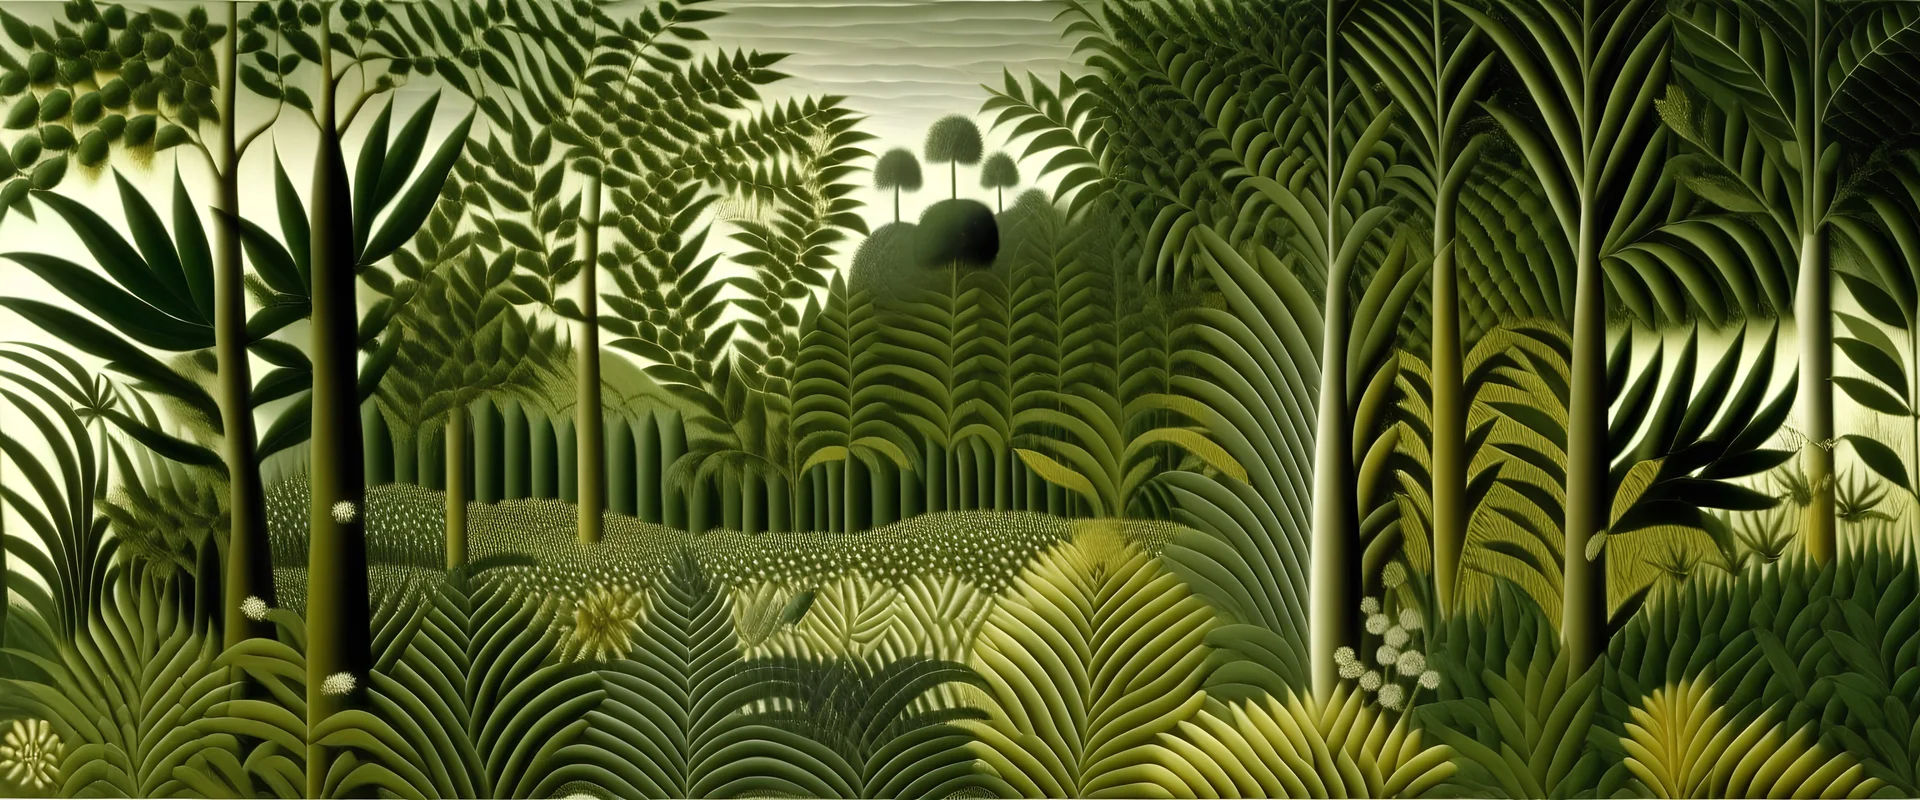 A gray jungle designed in ancient Roman mosaics painted by Henri Rousseau